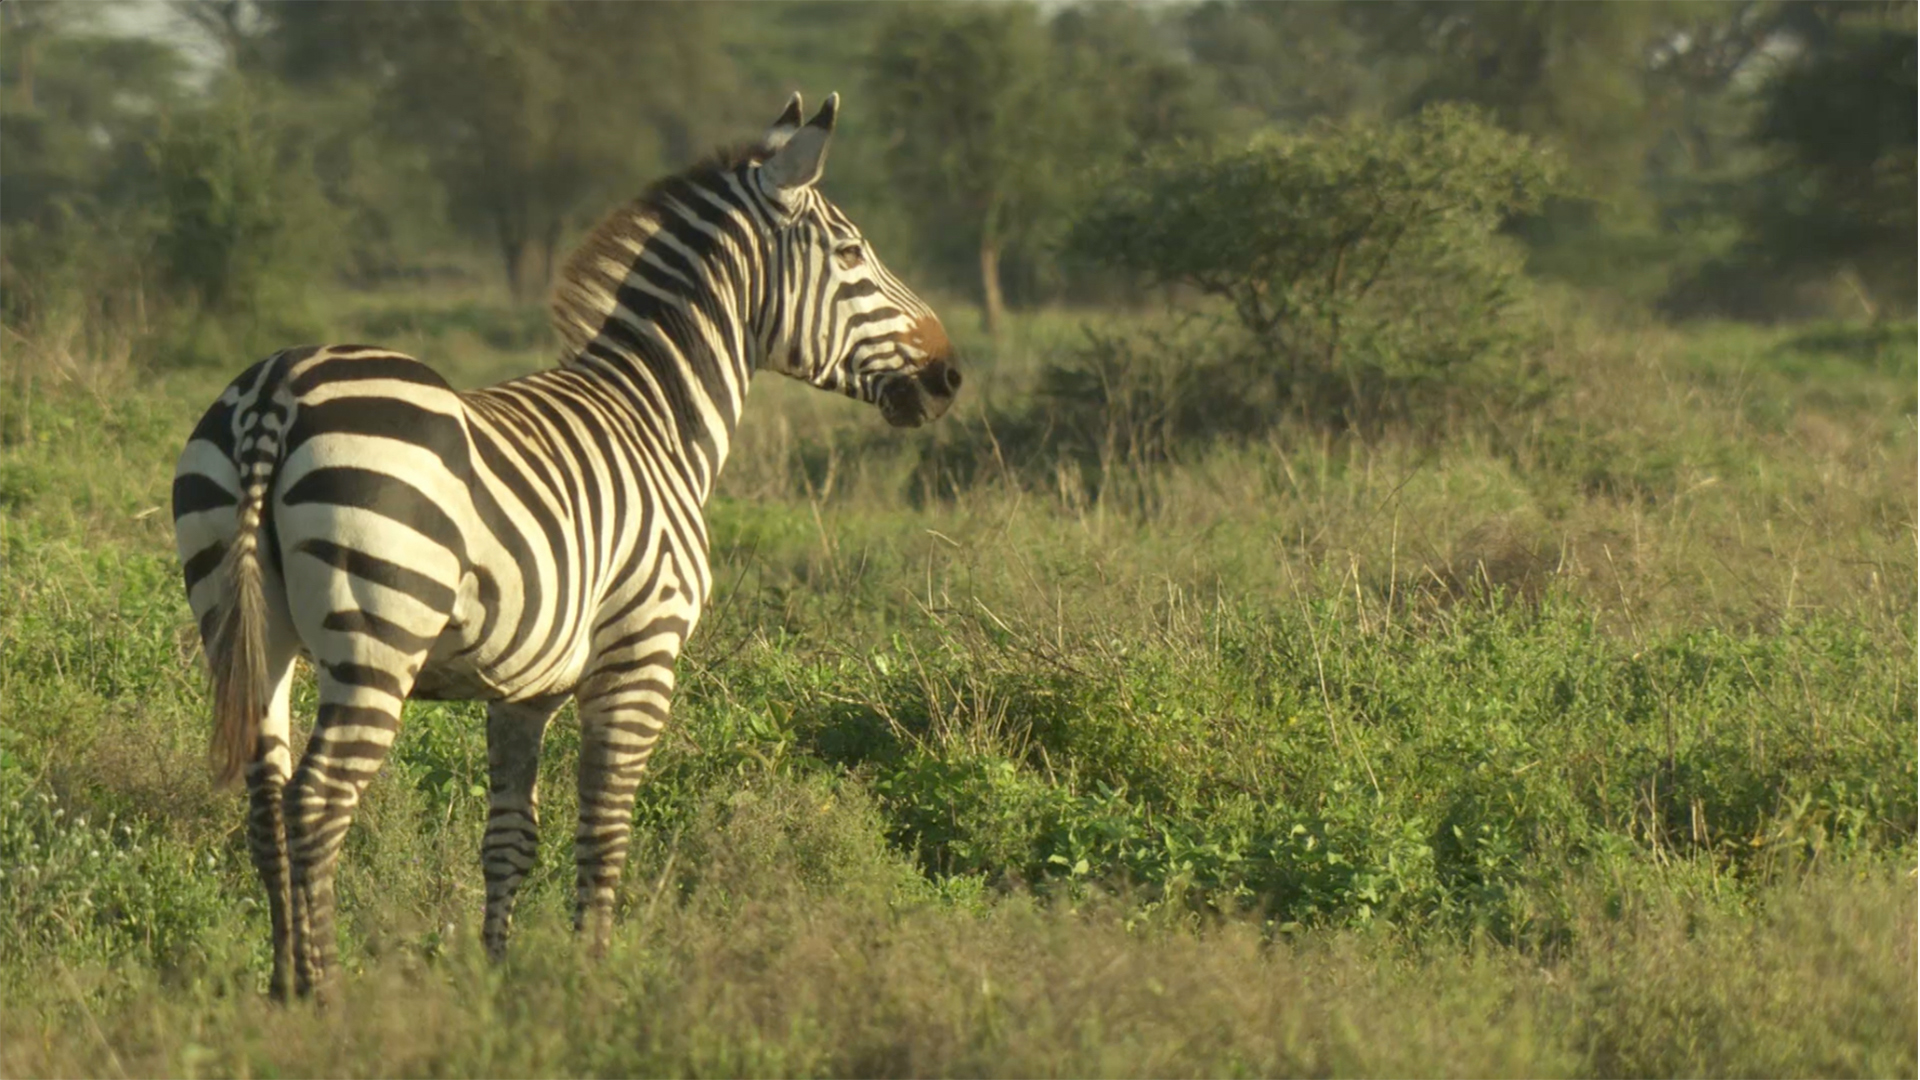 Zebra stallion on alert in woodland. This is from Zebras of the Serengeti. [Photo of the day - May 2022]